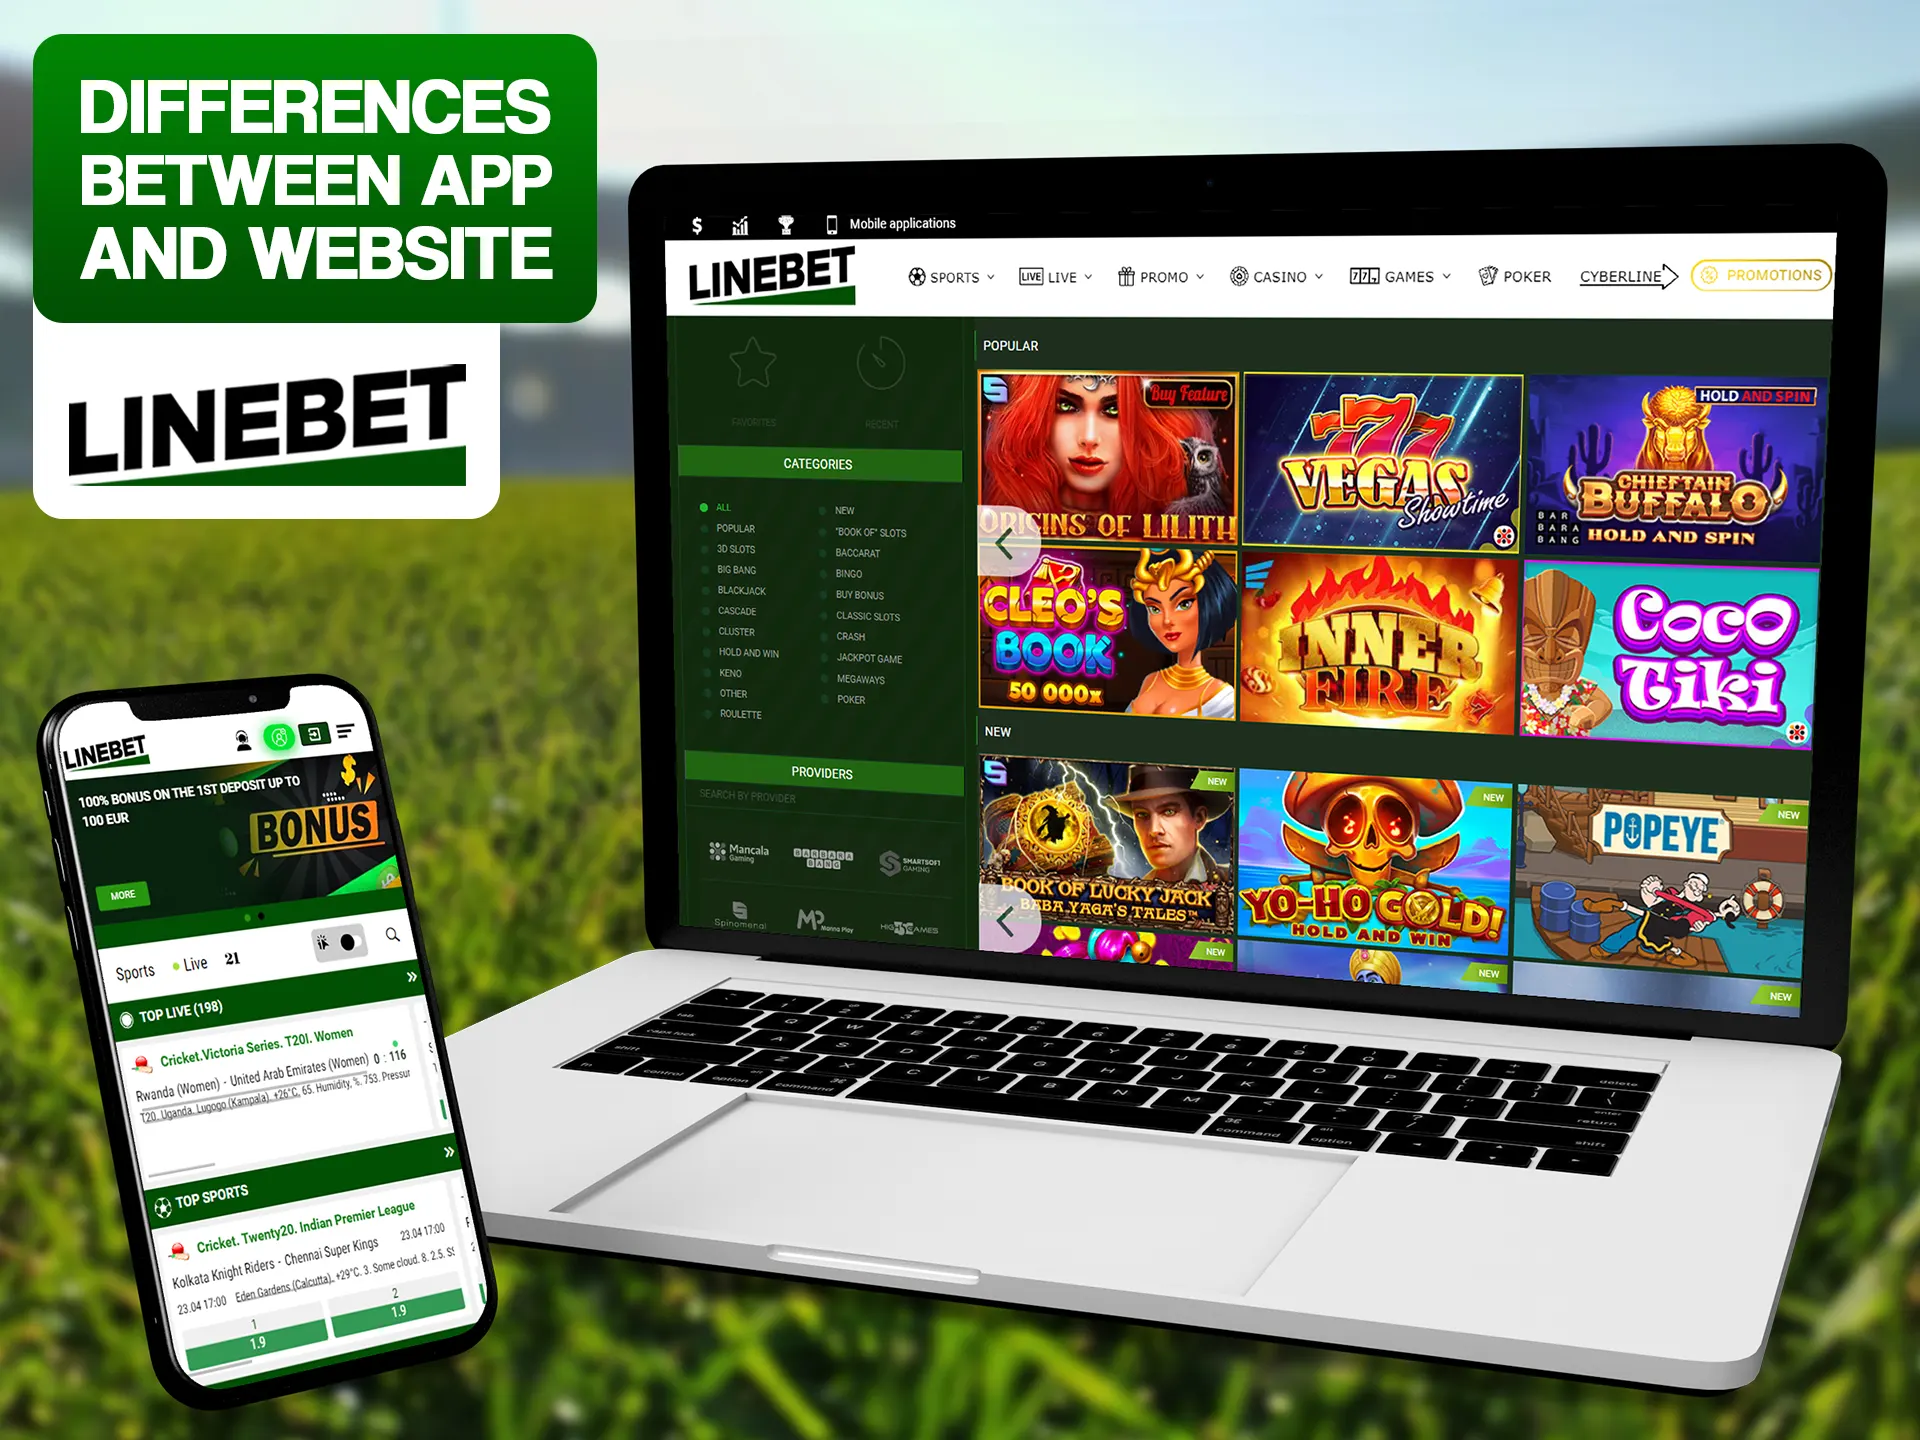 Learn more about pros and cons of diffenrent versions of Linebet.